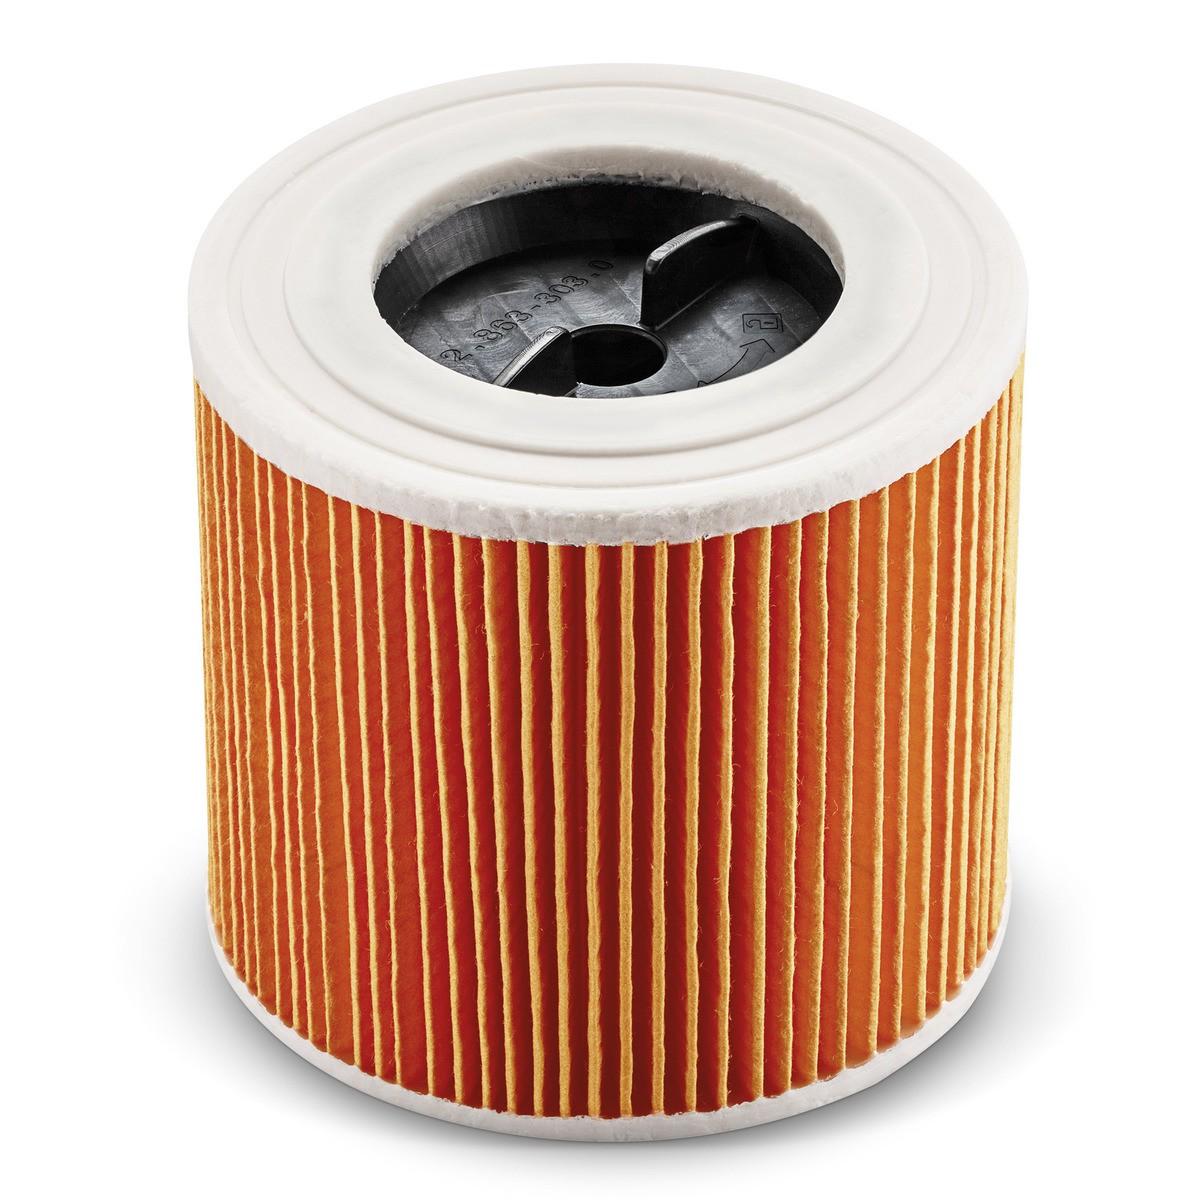 Selected image for KÄRCHER Filter WD